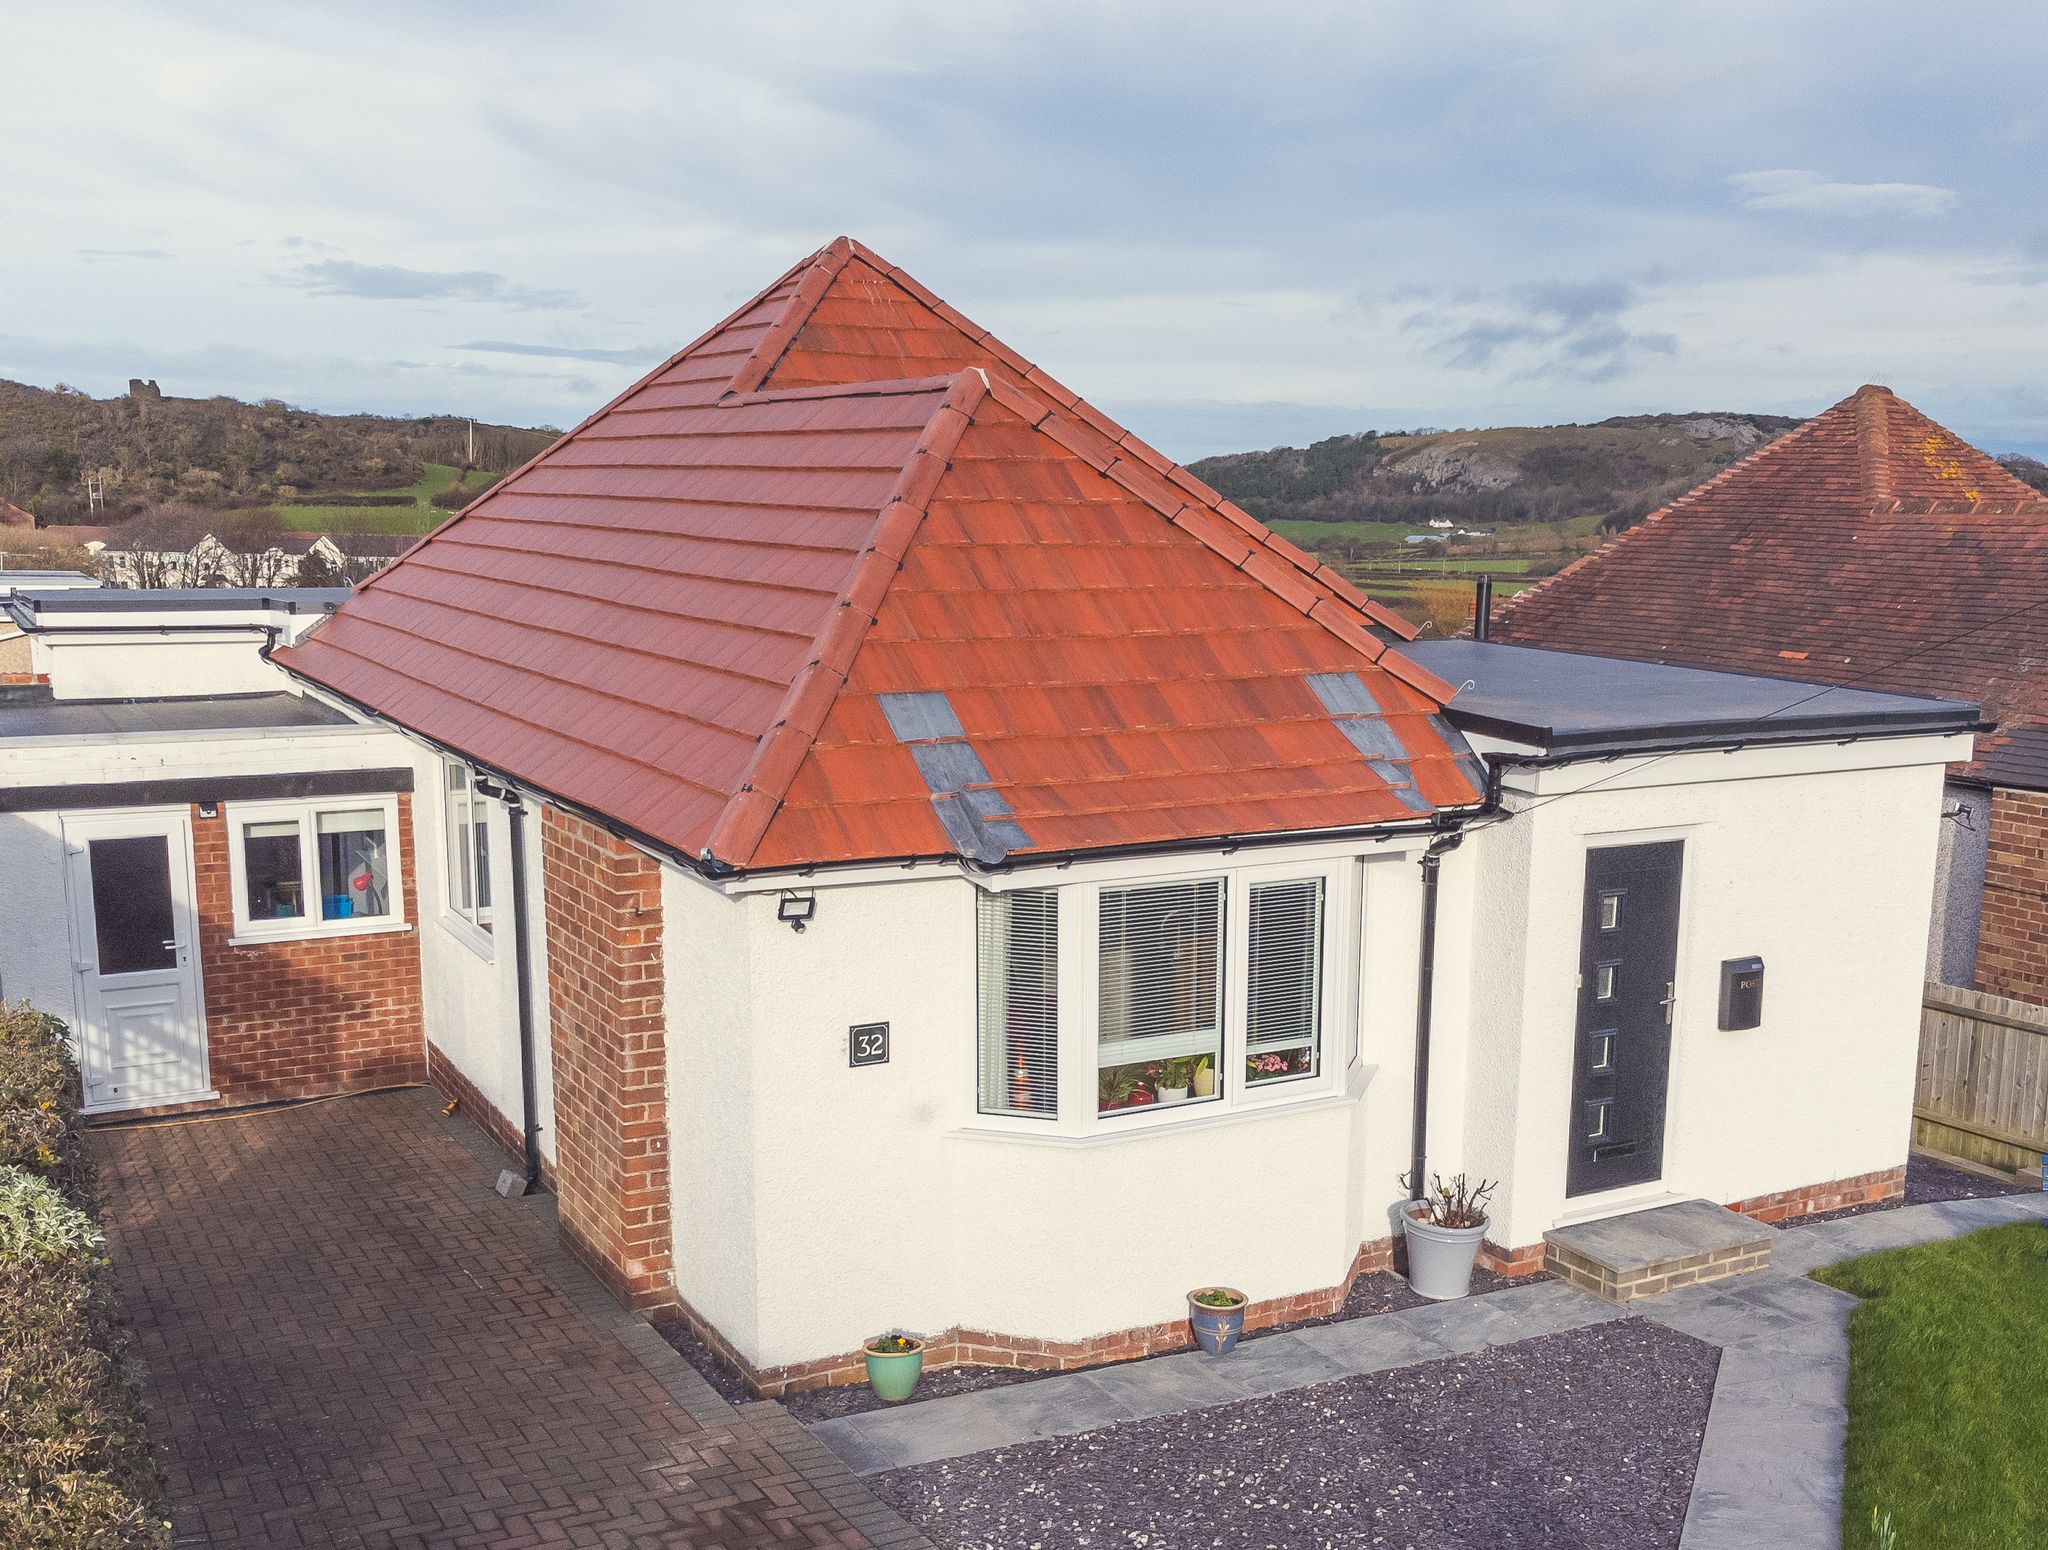 Tile Roof Contractors Bryngwran, LL65 - DD Roofing